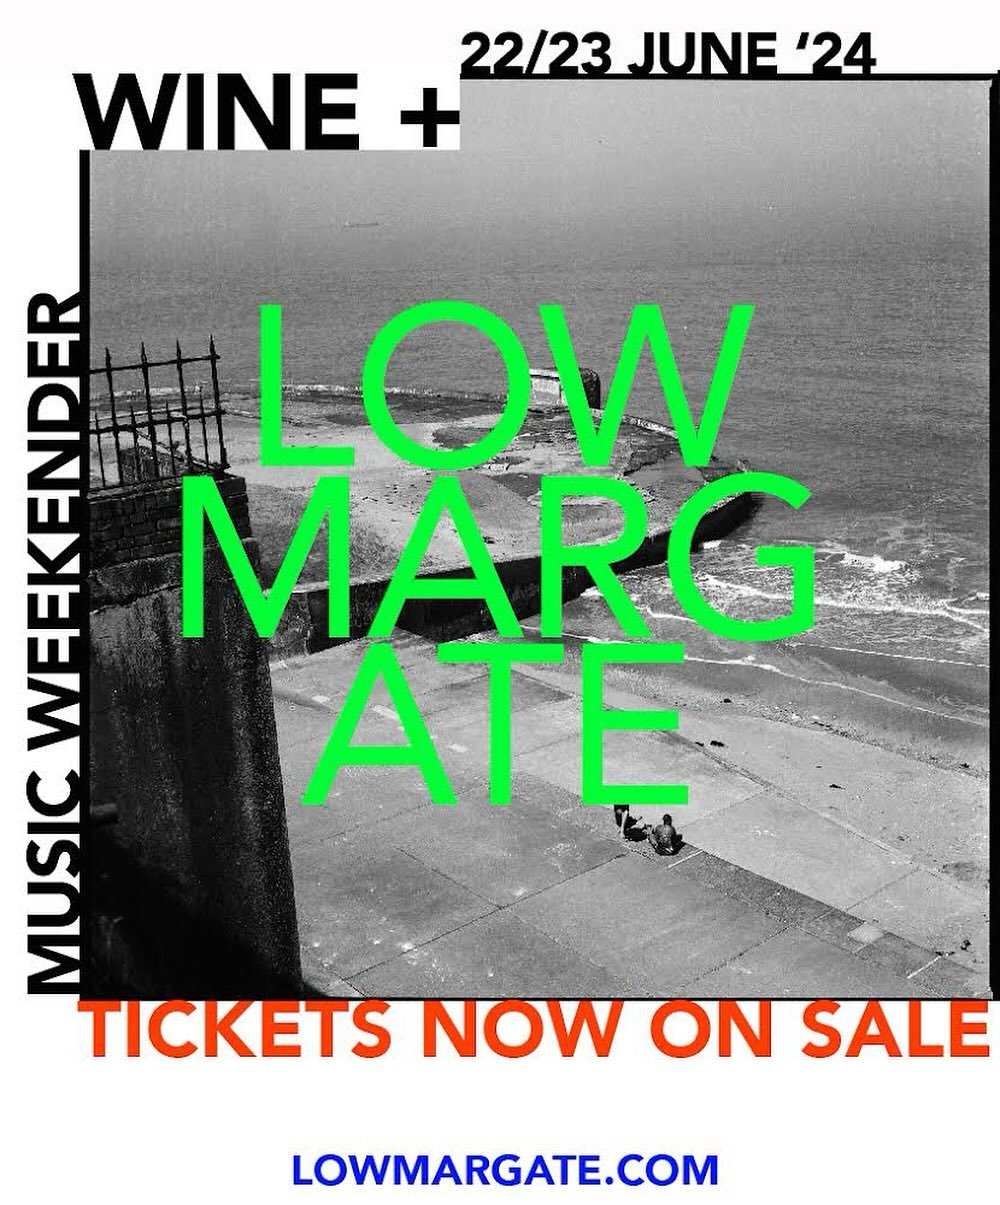 TICKETS NOW ON SALE for the LOW Tasting Rooms. You can read more about this epic event at lowmargate.com as we slowly reveal more venues and their wine and music pairings over the coming weeks. But first, get a ticket to the tasting rooms for a chanc